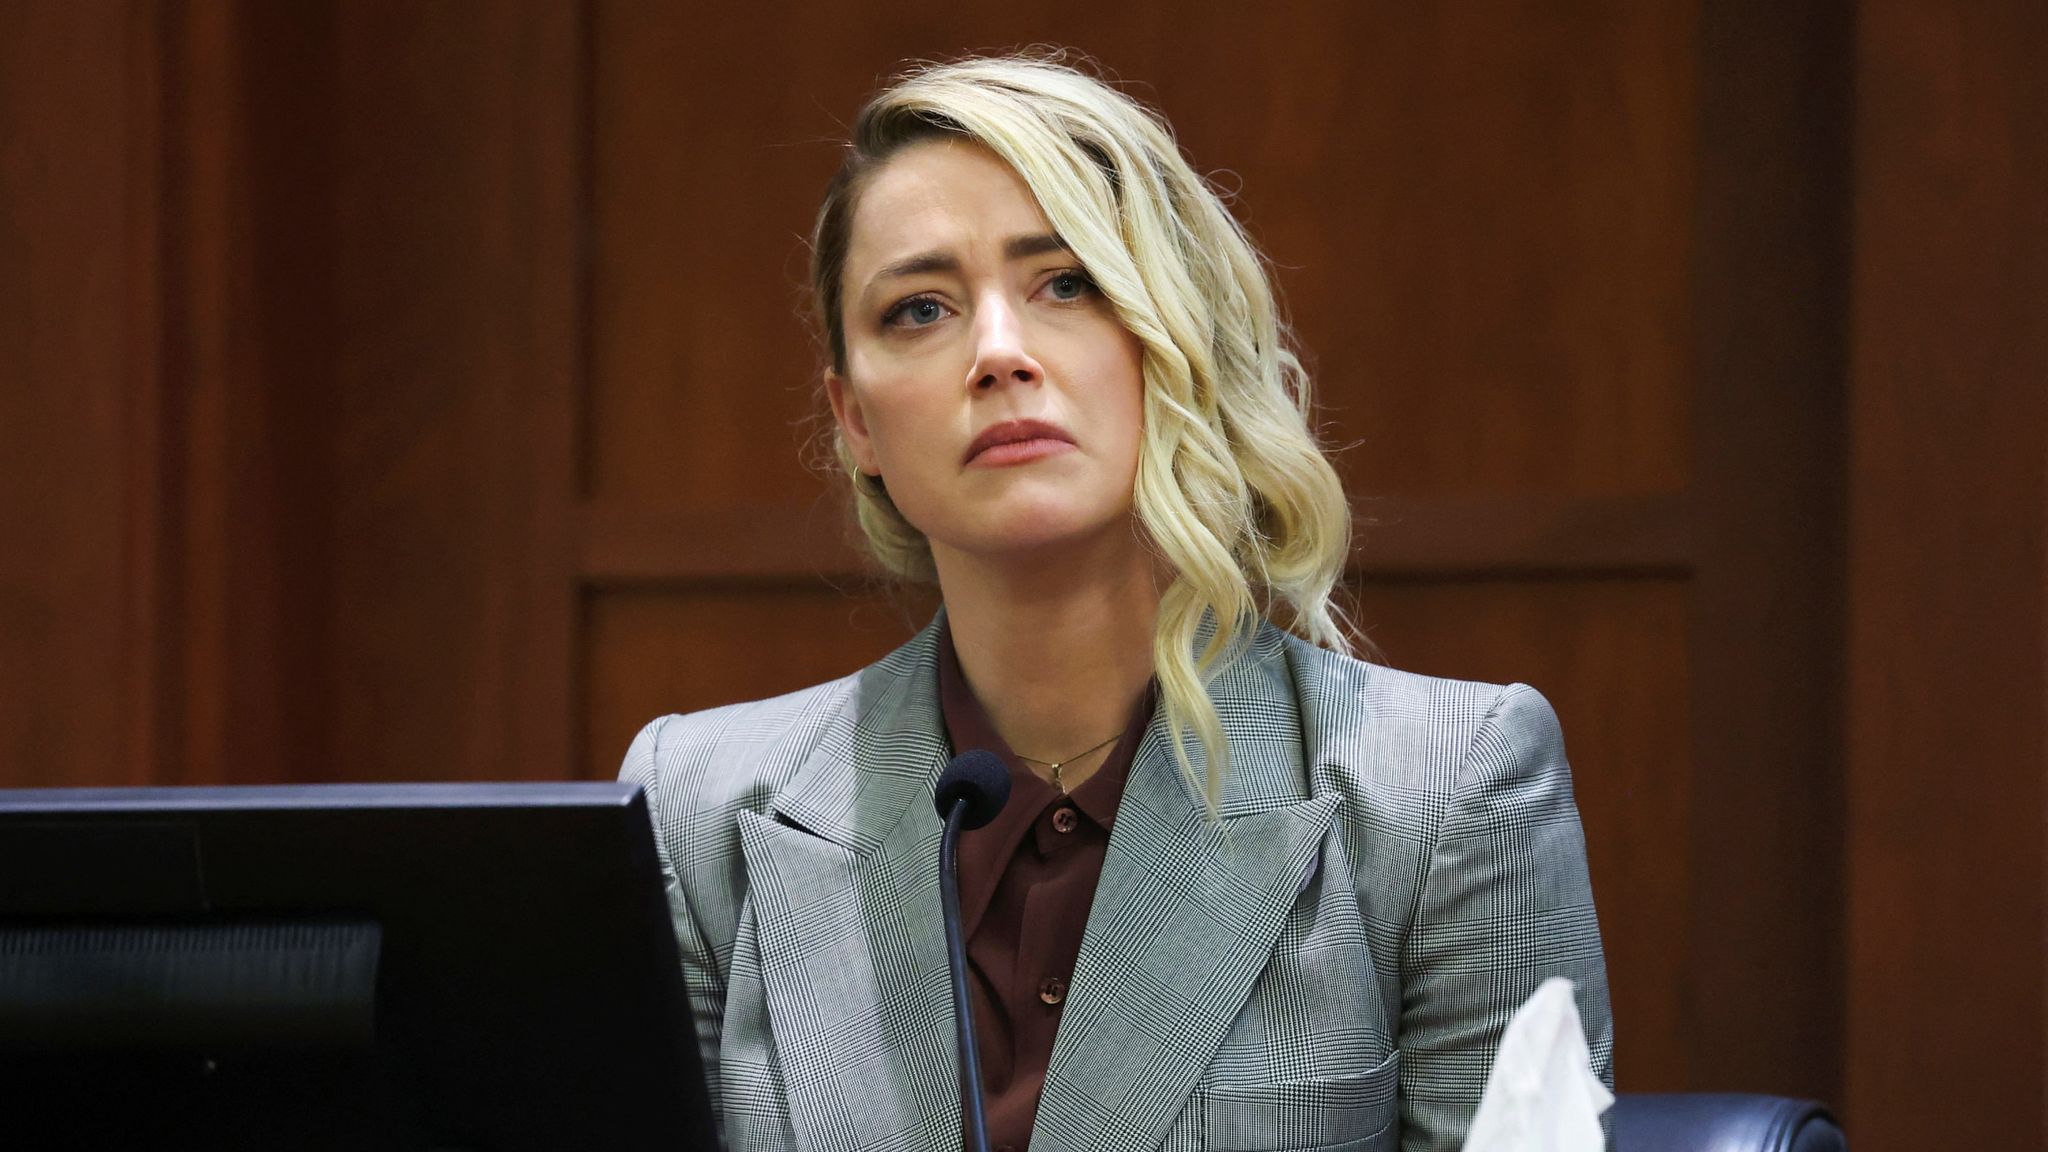 Actor Amber Heard testifies during the Depp vs Heard defamation trial at the Fairfax County Circuit Court in Fairfax, Virginia, U.S. May 26, 2022. Michael Reynolds/Pool via REUTERS 